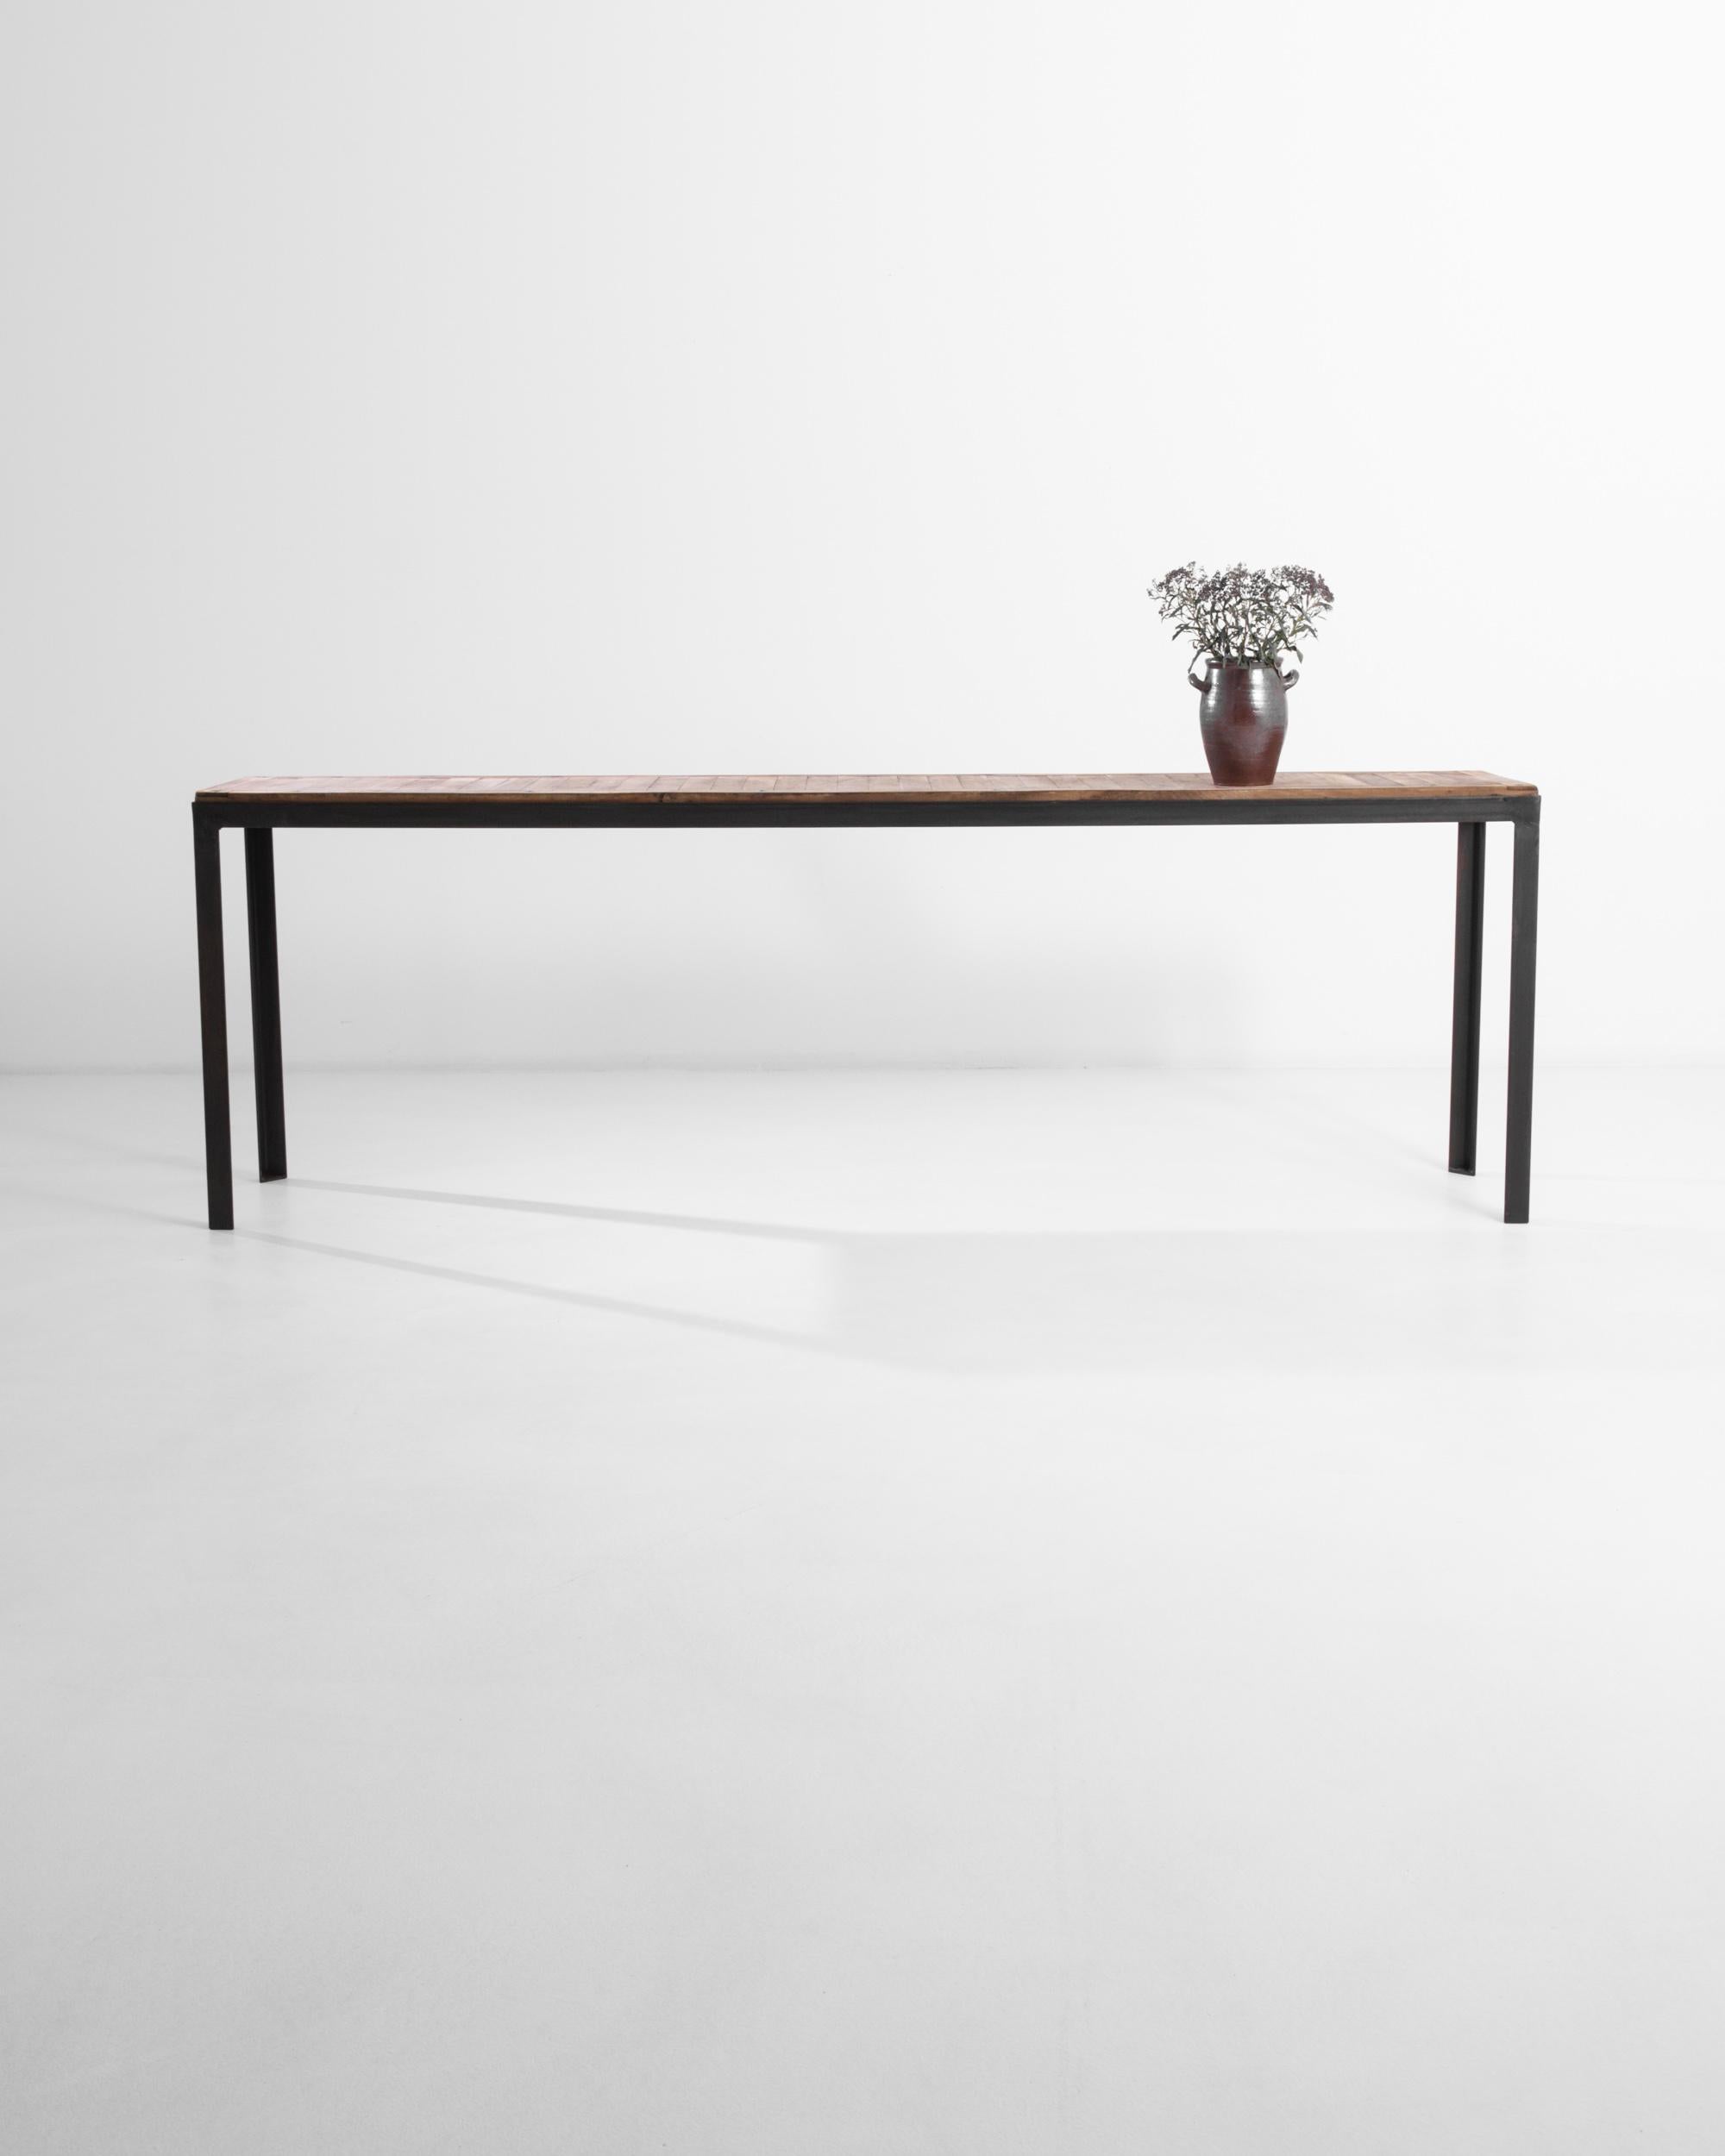 A console table from France, this piece features an elongated frame topped by elegant wooden panels, creating a sleek profile. The black metal creates a minimal frame for the reclaimed boards, completed by the beautifully patinated wood and its